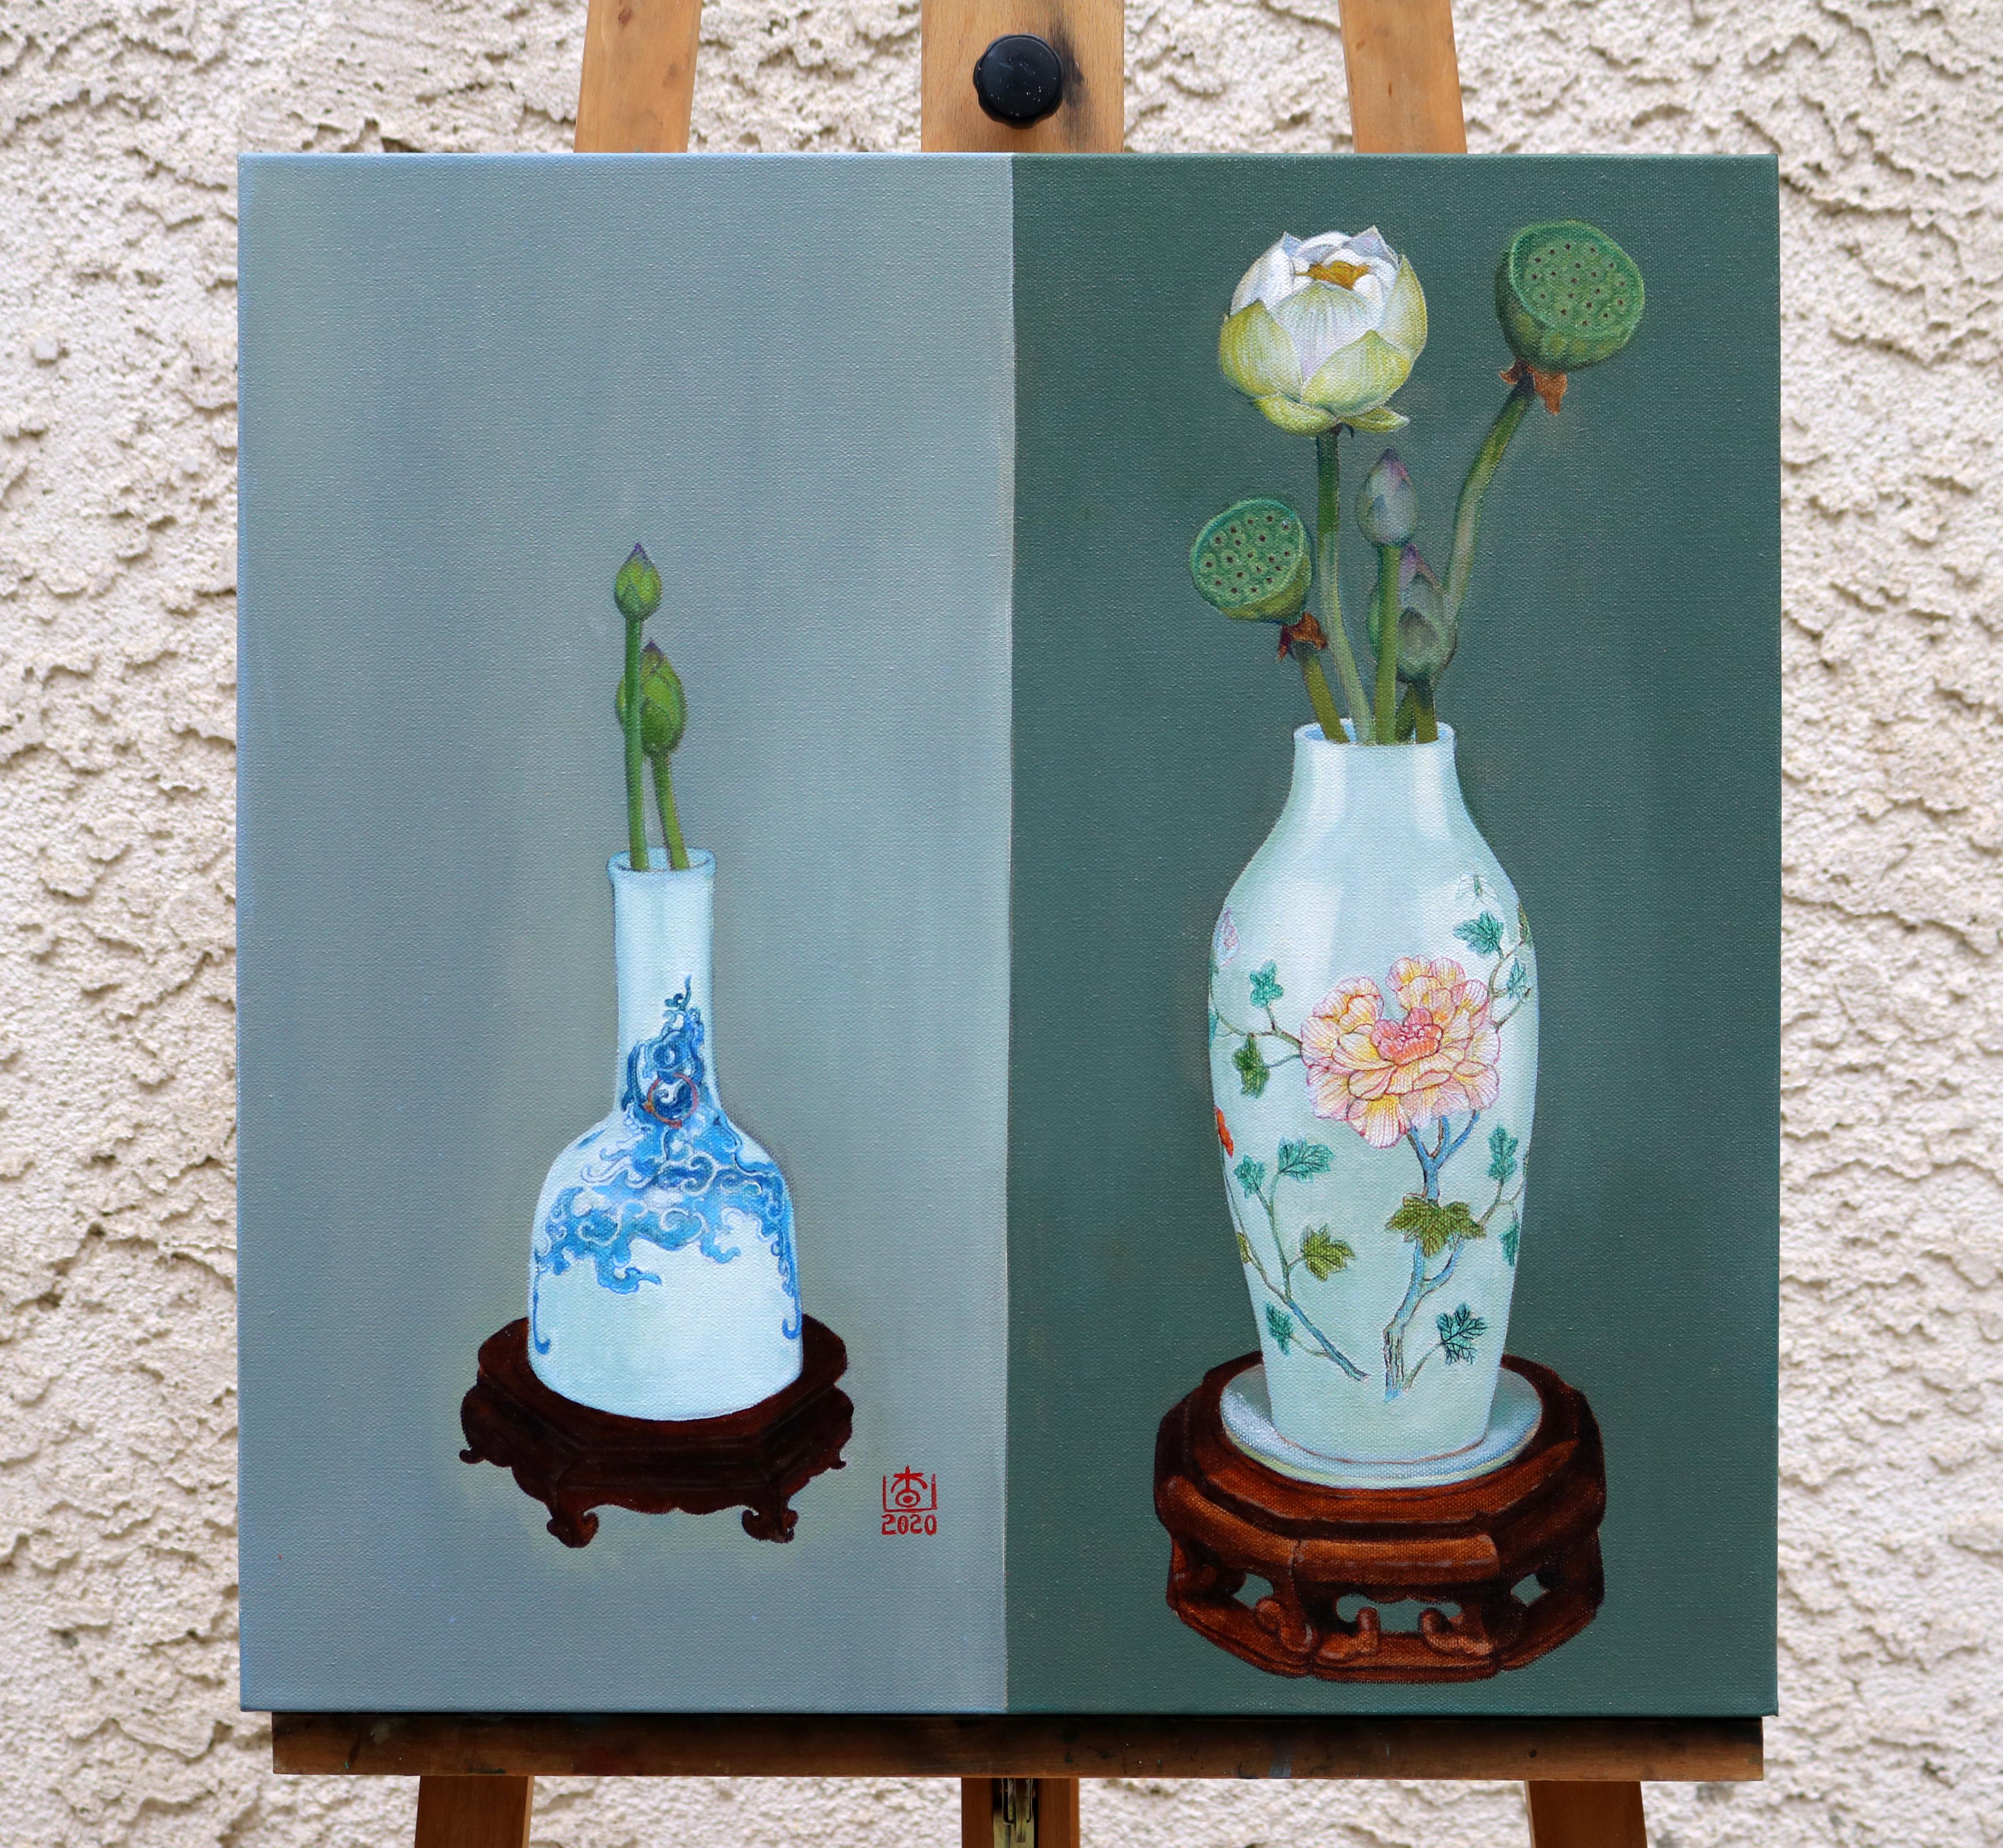 <p>Artist Comments<br>Artist Guigen Zha paints a realistic still life of lotuses in different stages of development. He props them on Chinese ceramic vases against a background of two different shades of colors. In traditional Chinese belief, the